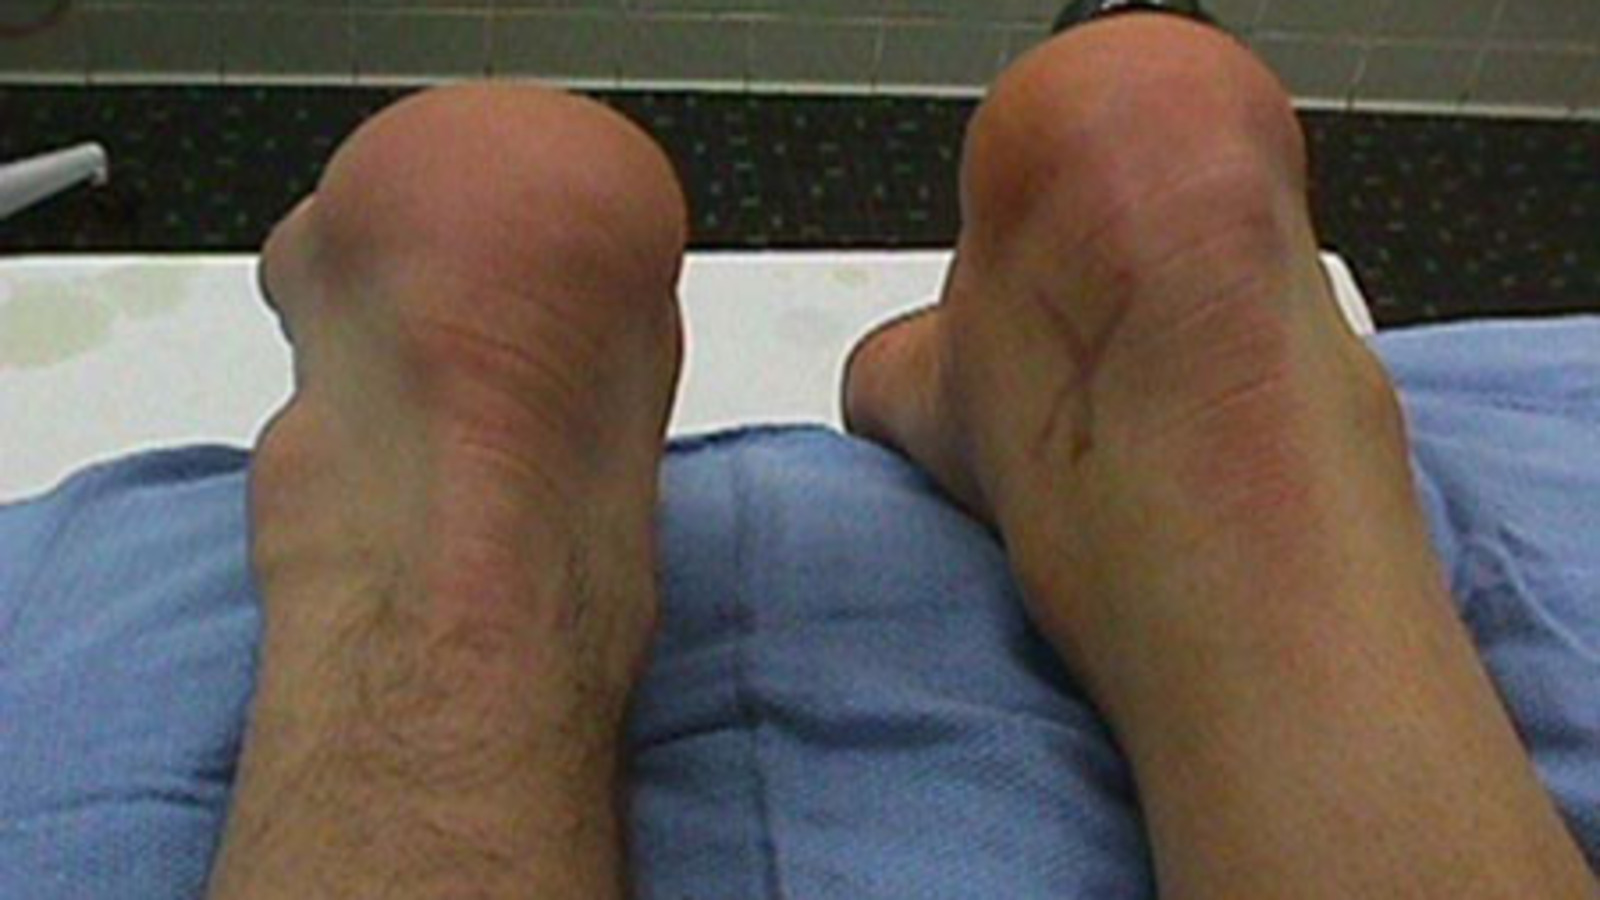 Ruptured Achilles Tendon Prior to Surgery